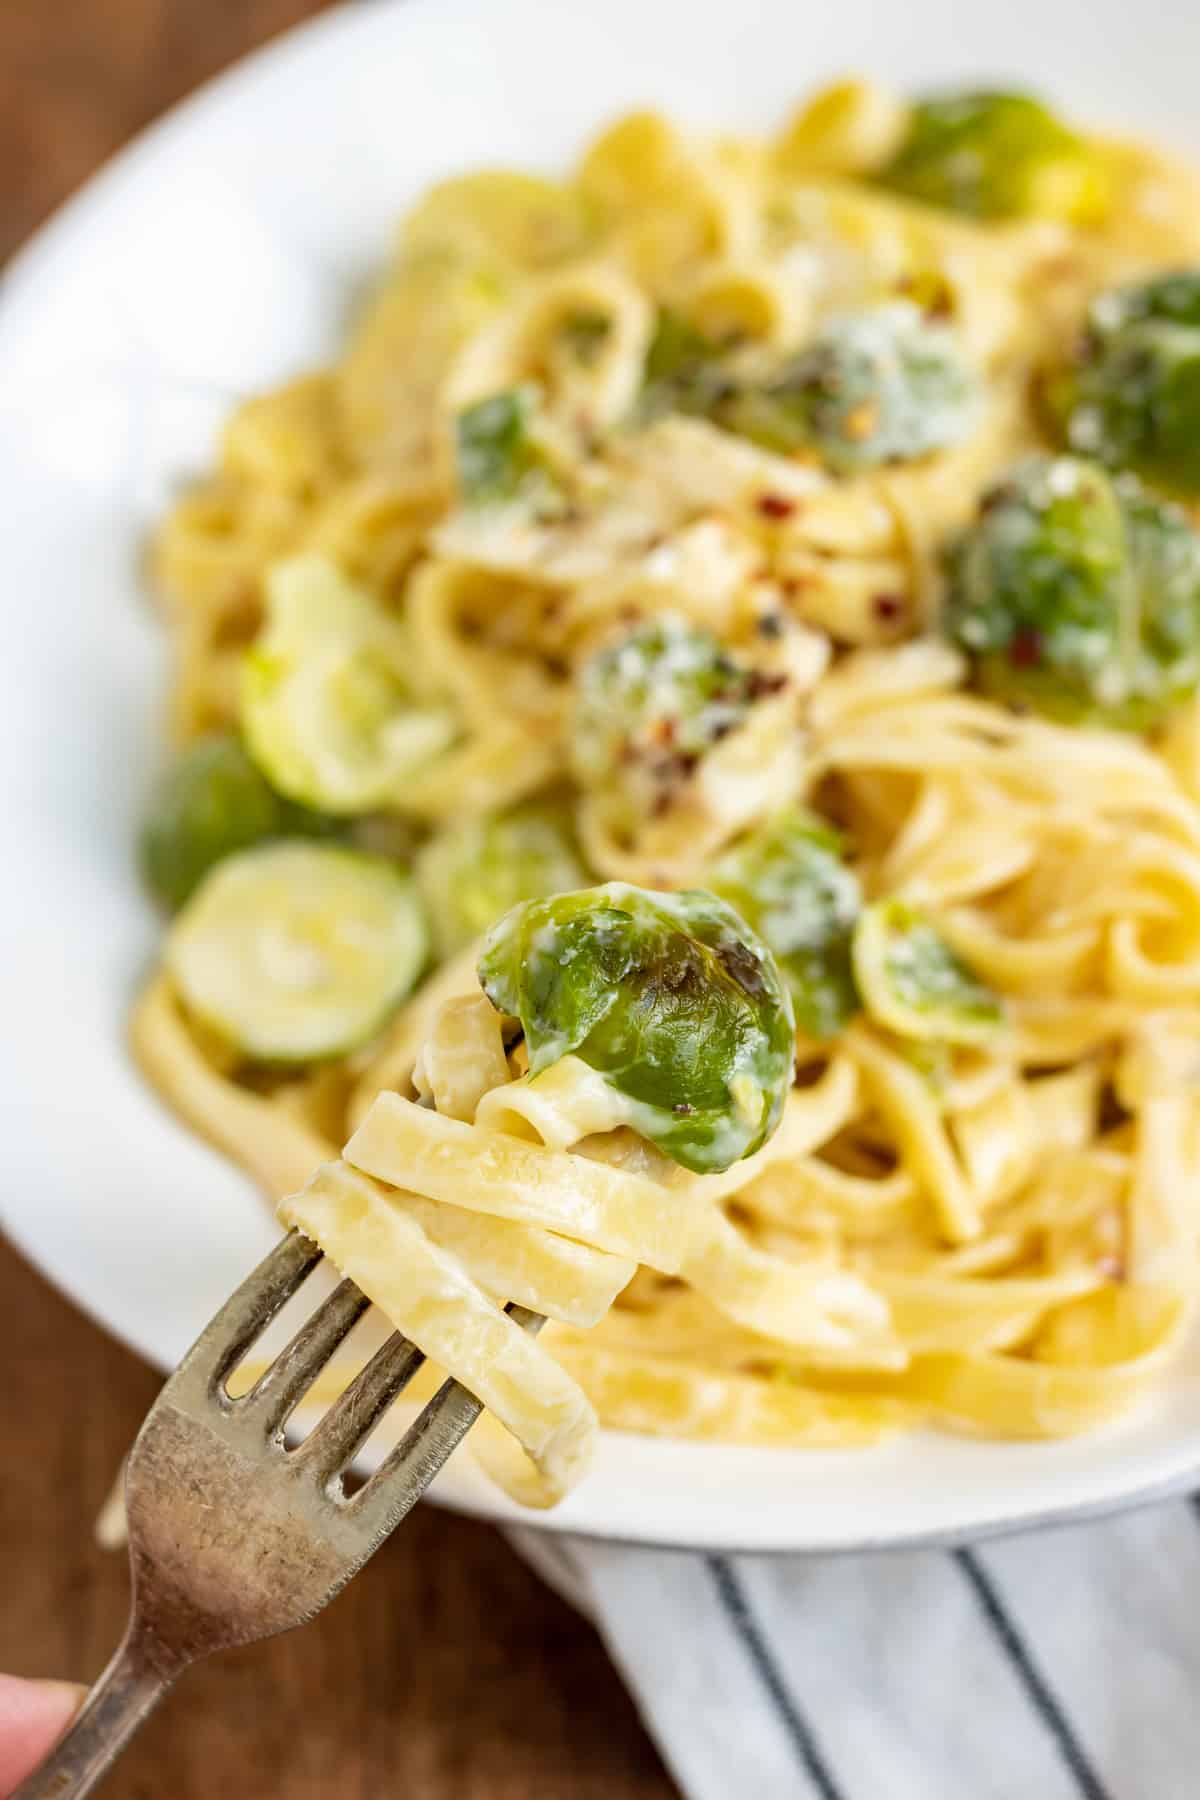 A forkful of brussels sprout pasta being lifted from the plate.